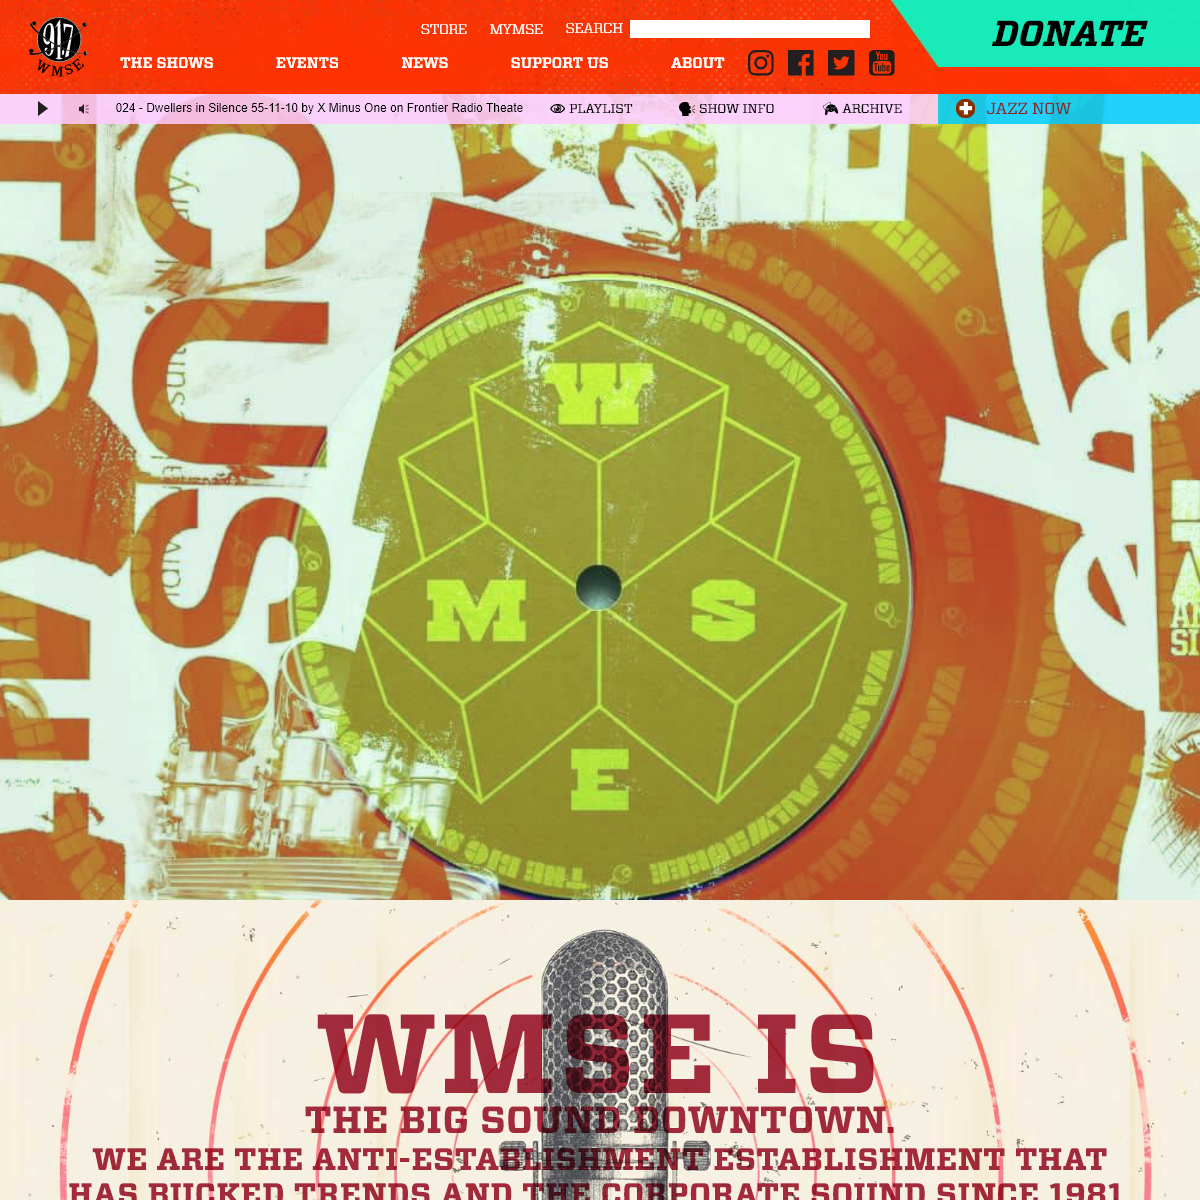 A complete backup of wmse.org